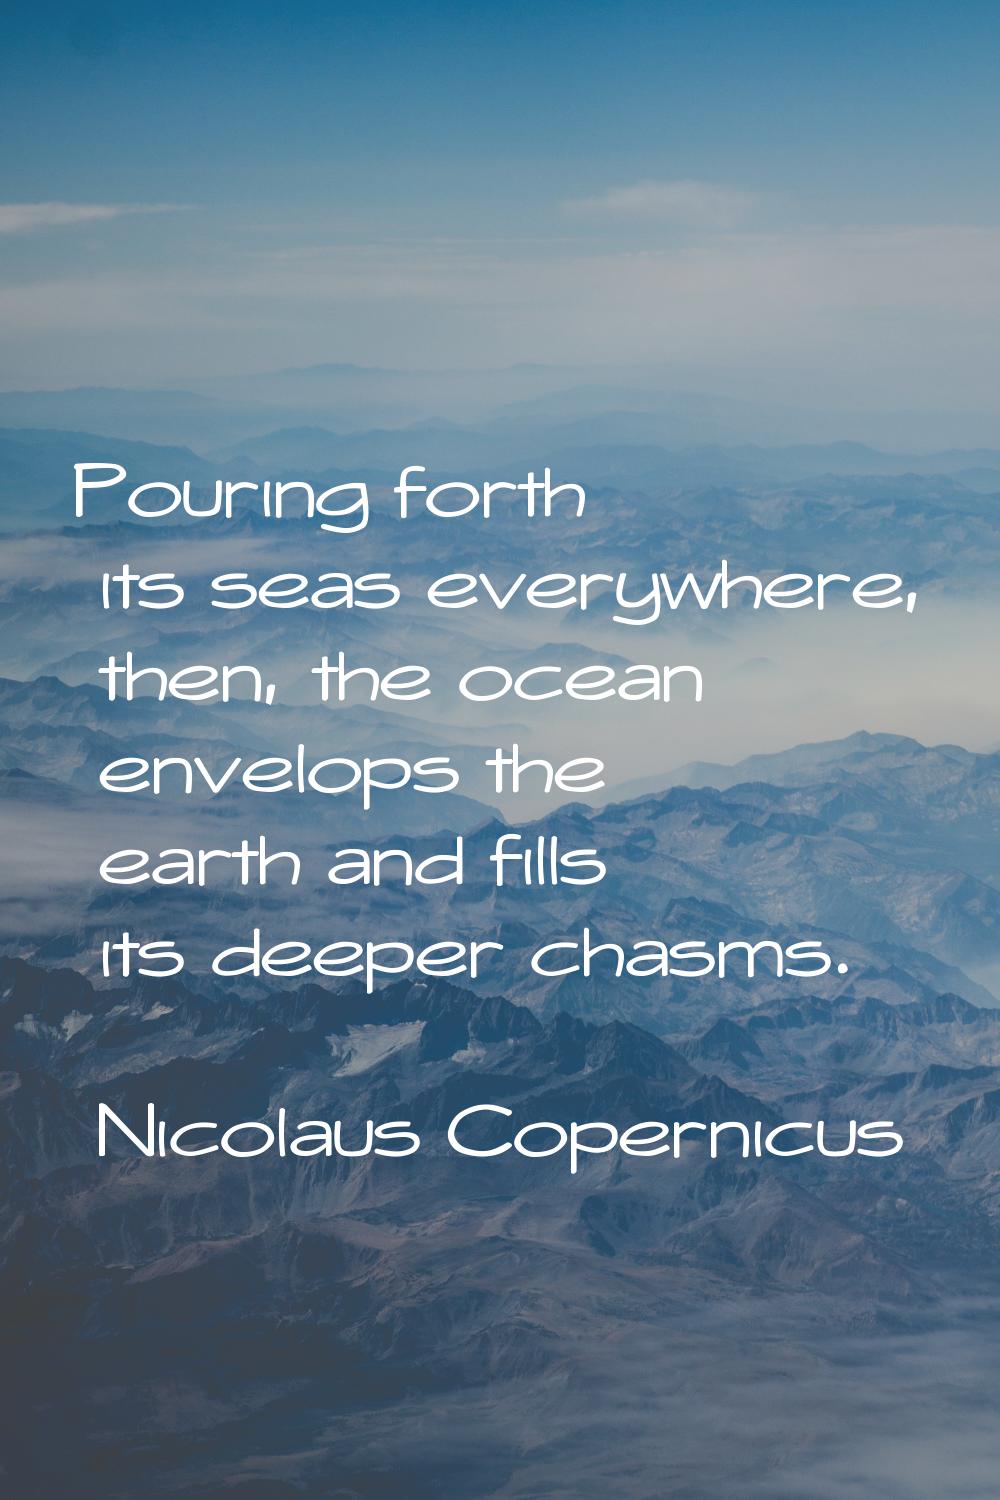 Pouring forth its seas everywhere, then, the ocean envelops the earth and fills its deeper chasms.